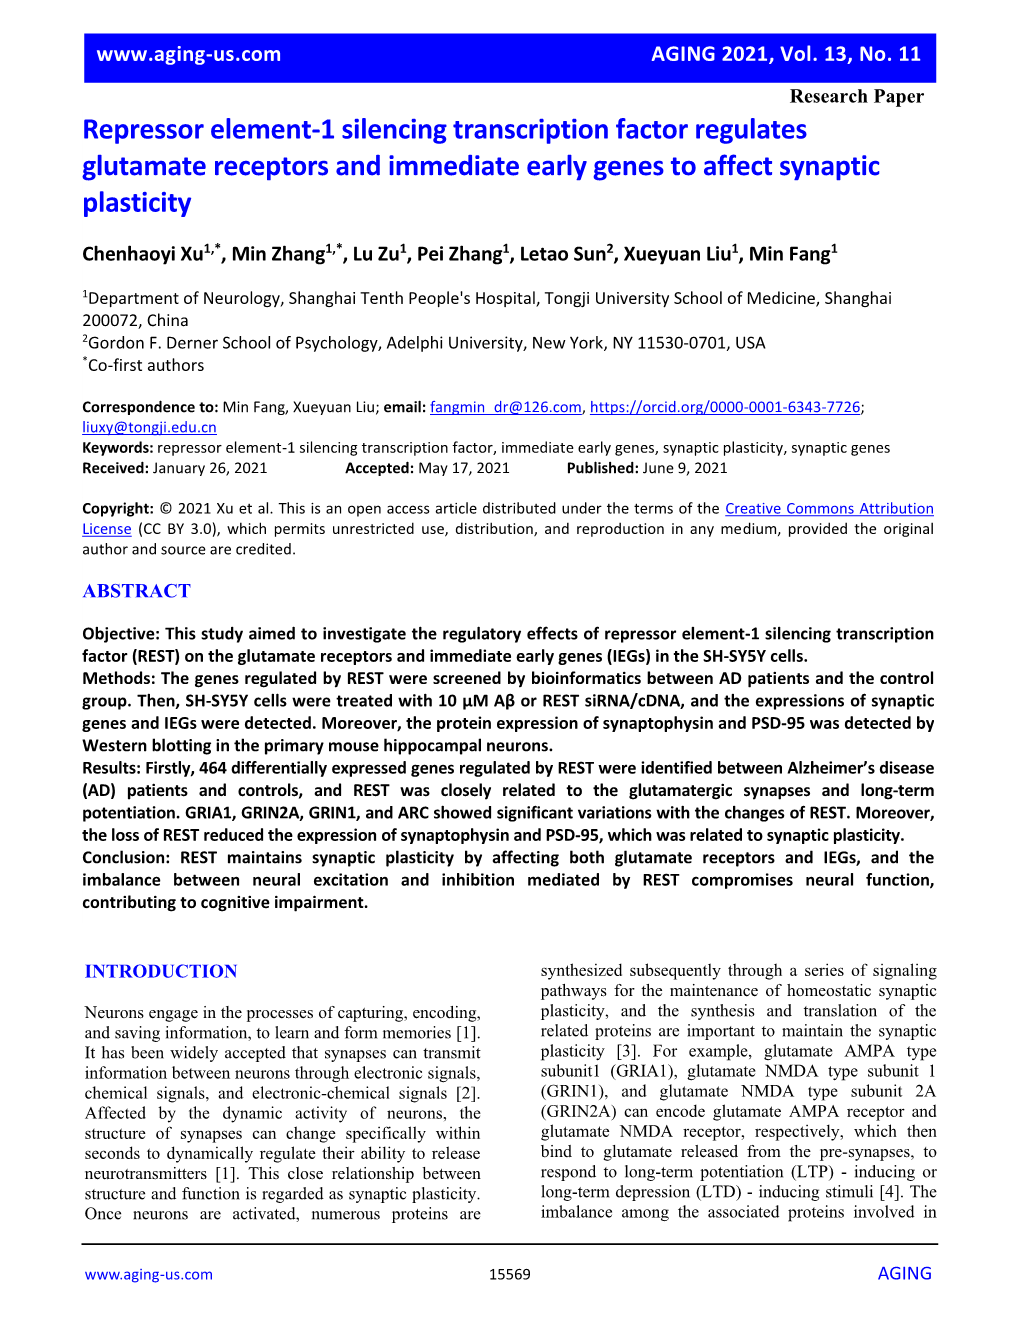 Repressor Element-1 Silencing Transcription Factor Regulates Glutamate Receptors and Immediate Early Genes to Affect Synaptic Plasticity